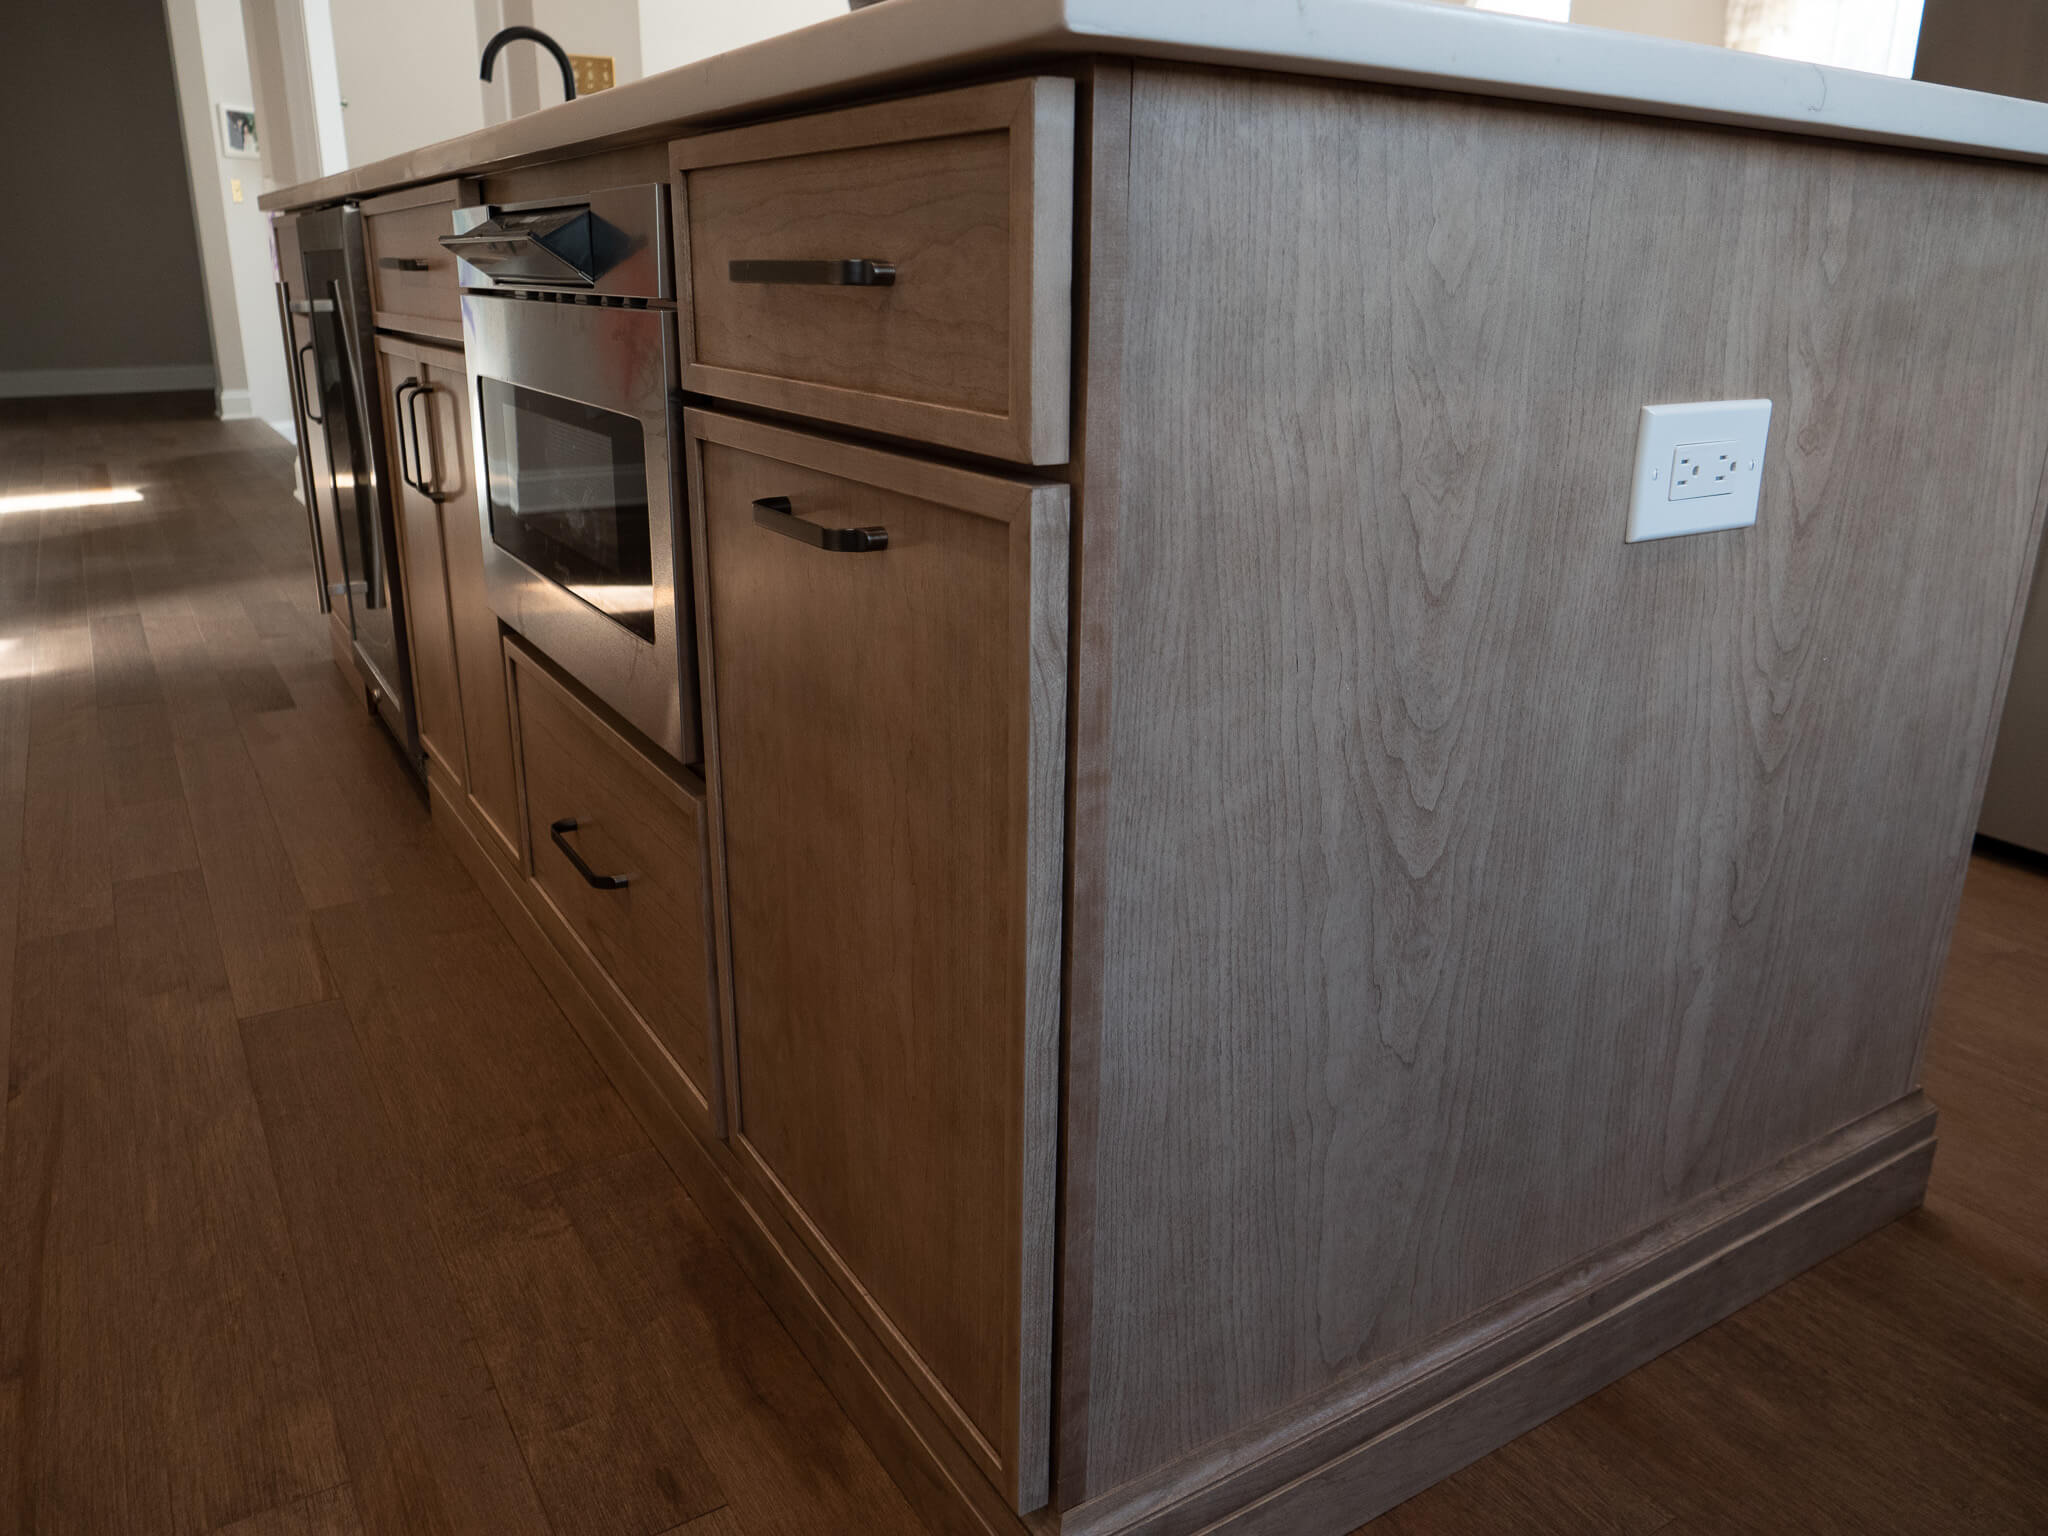 close up view of wooden cabinets and microwave